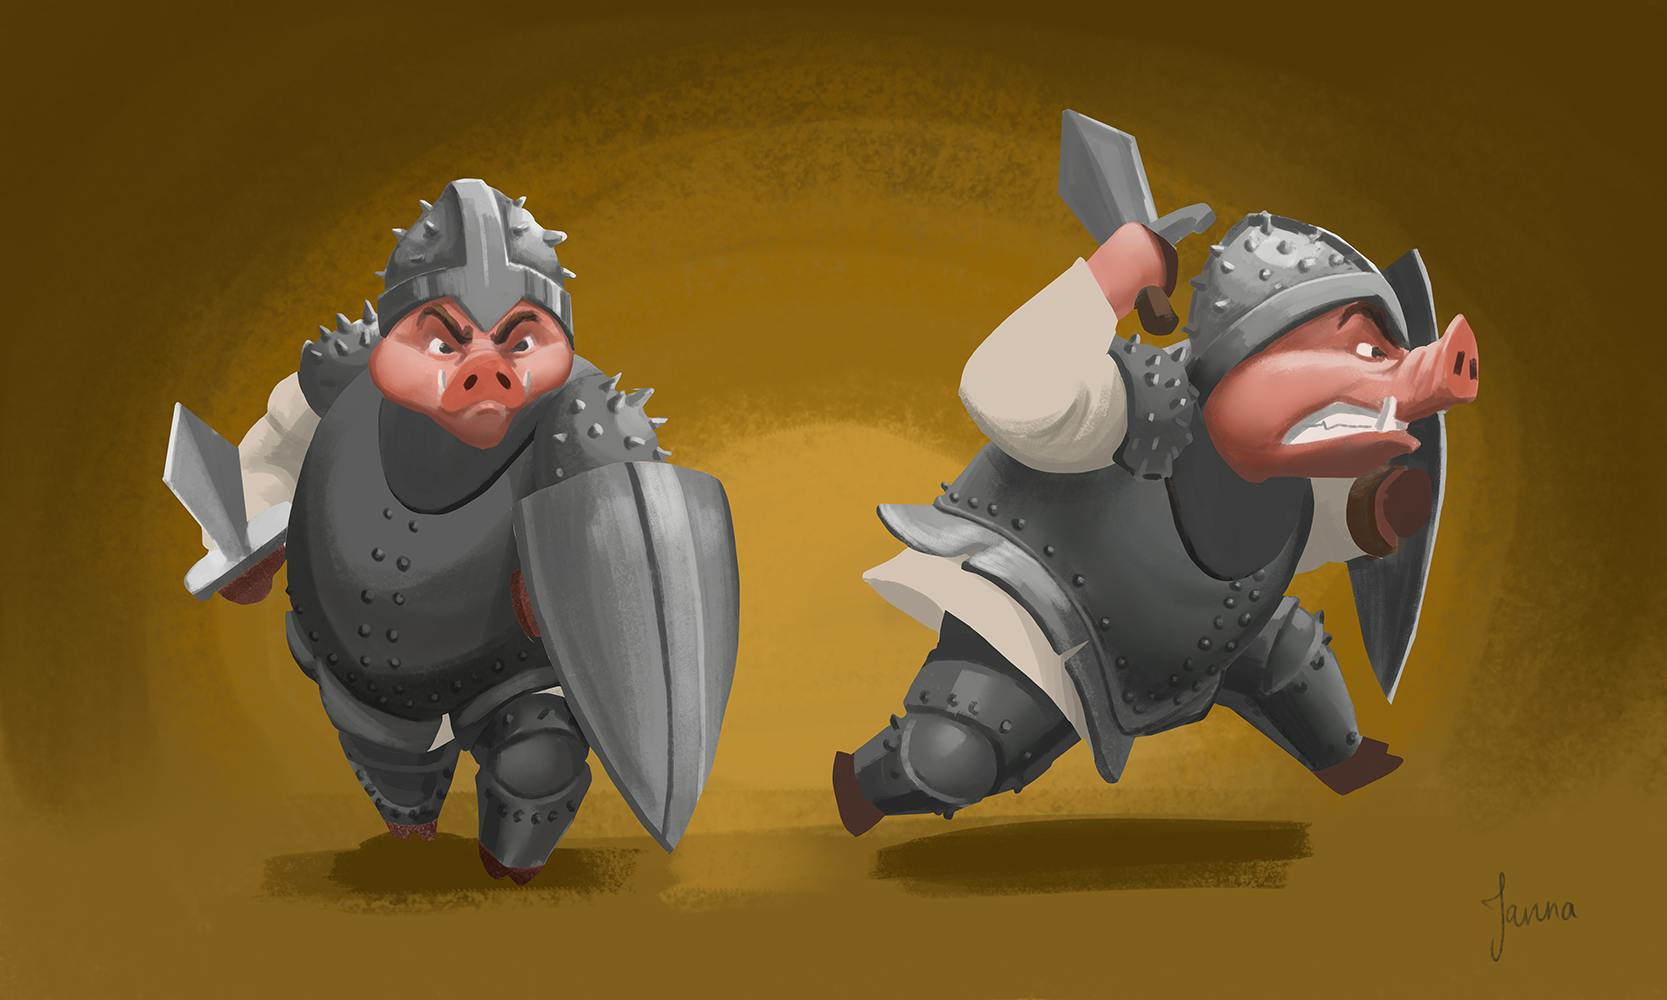 Two male pigs in suits of armor